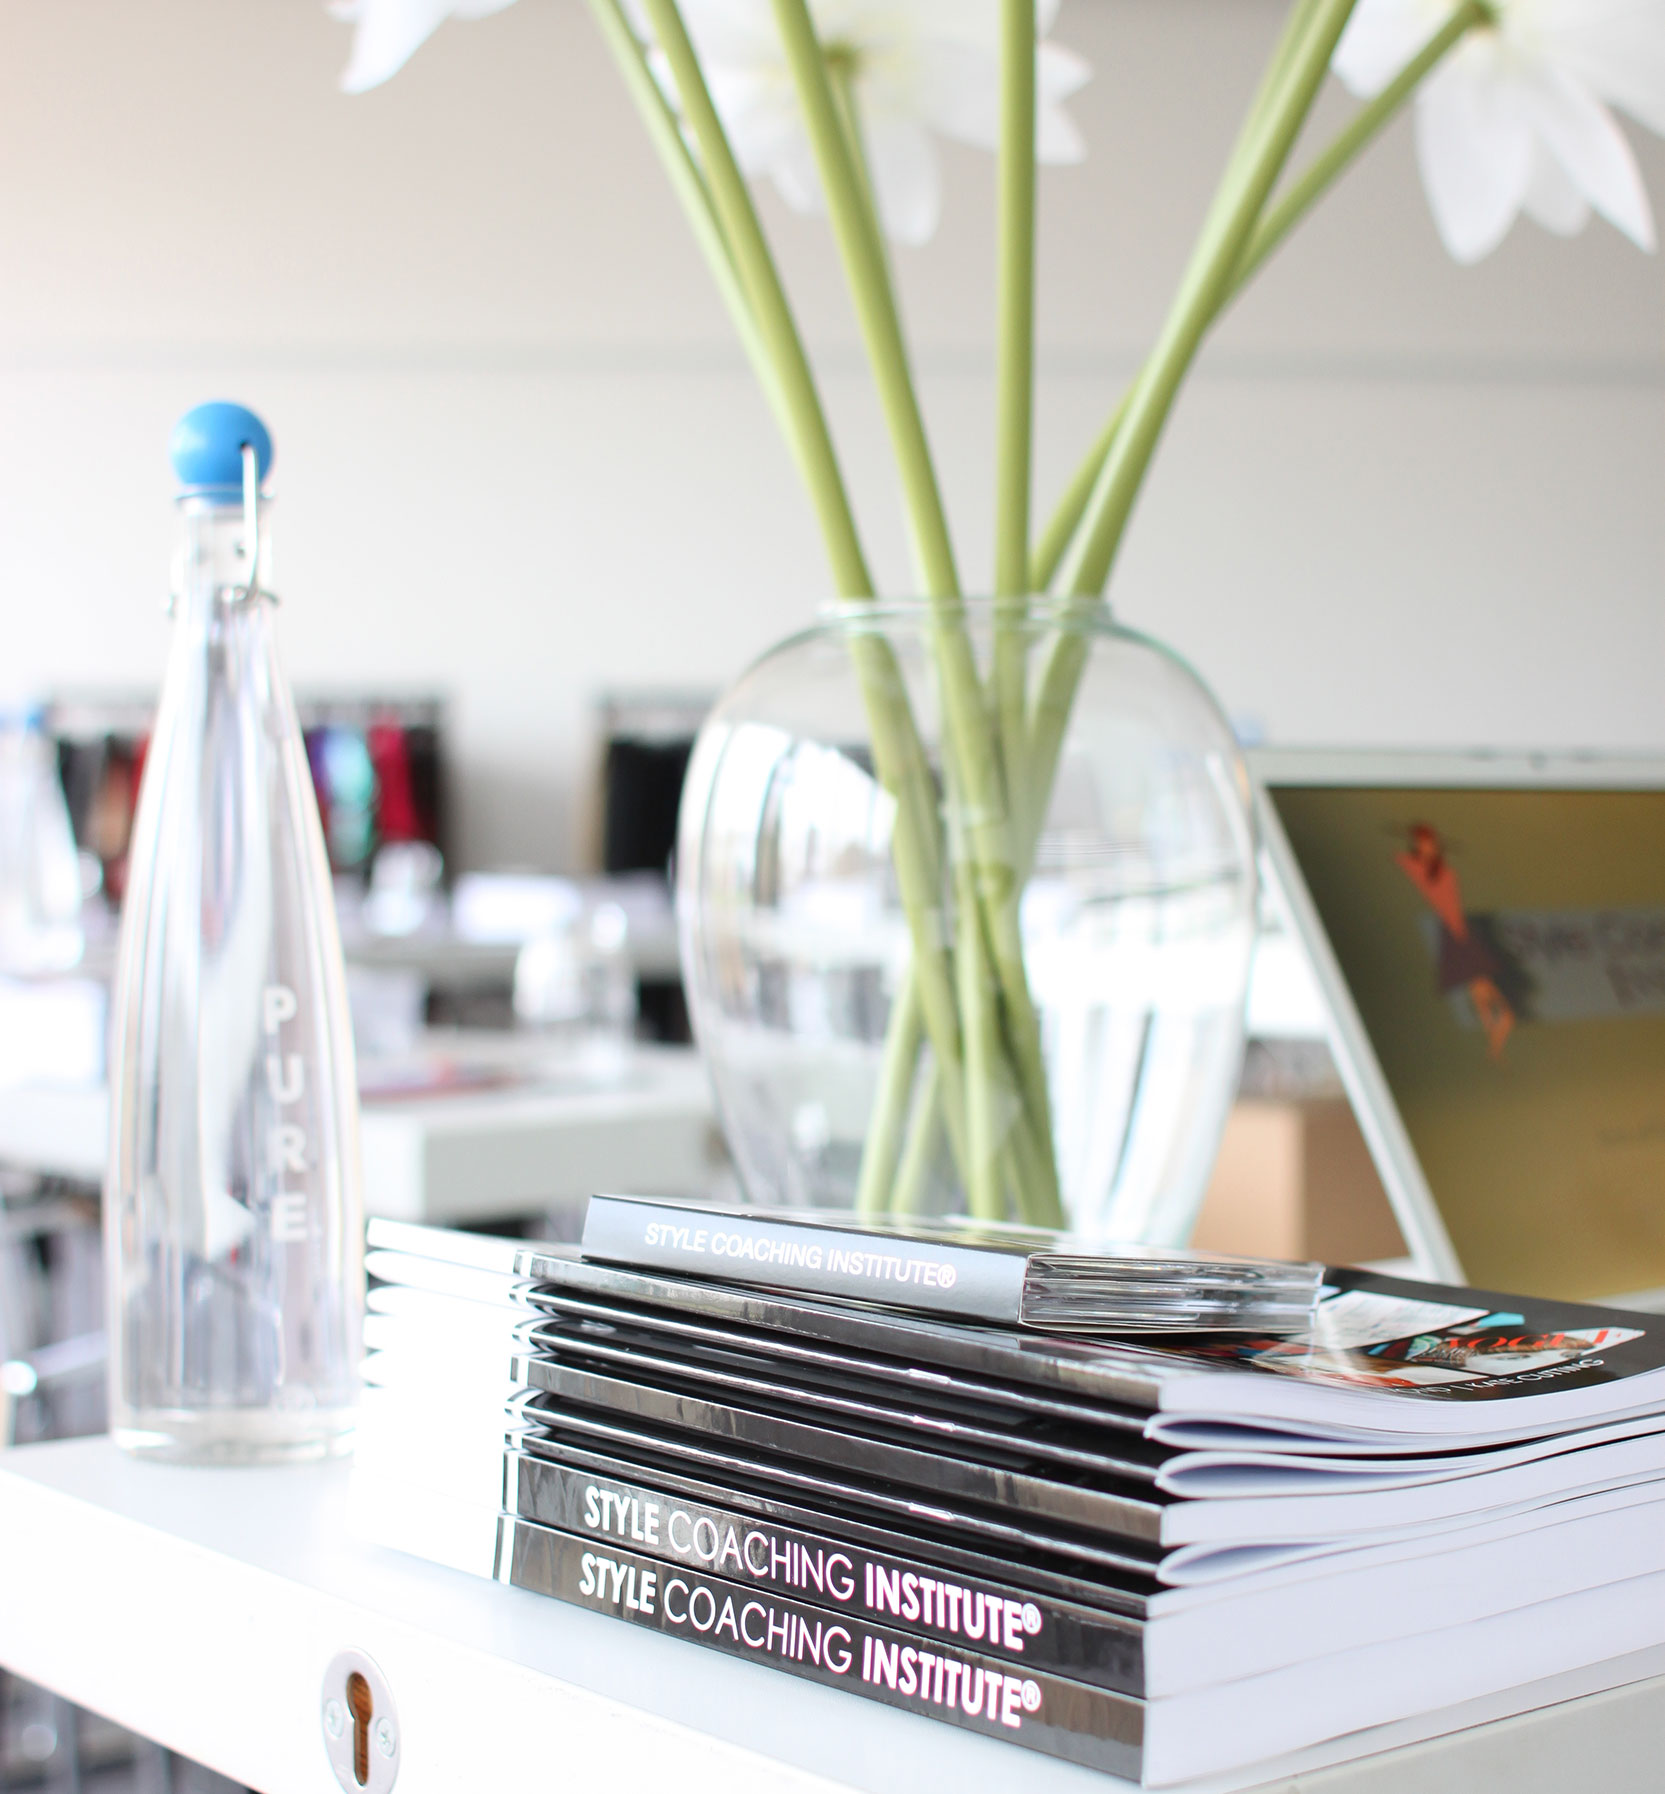 Style Coaching online course books on a desk